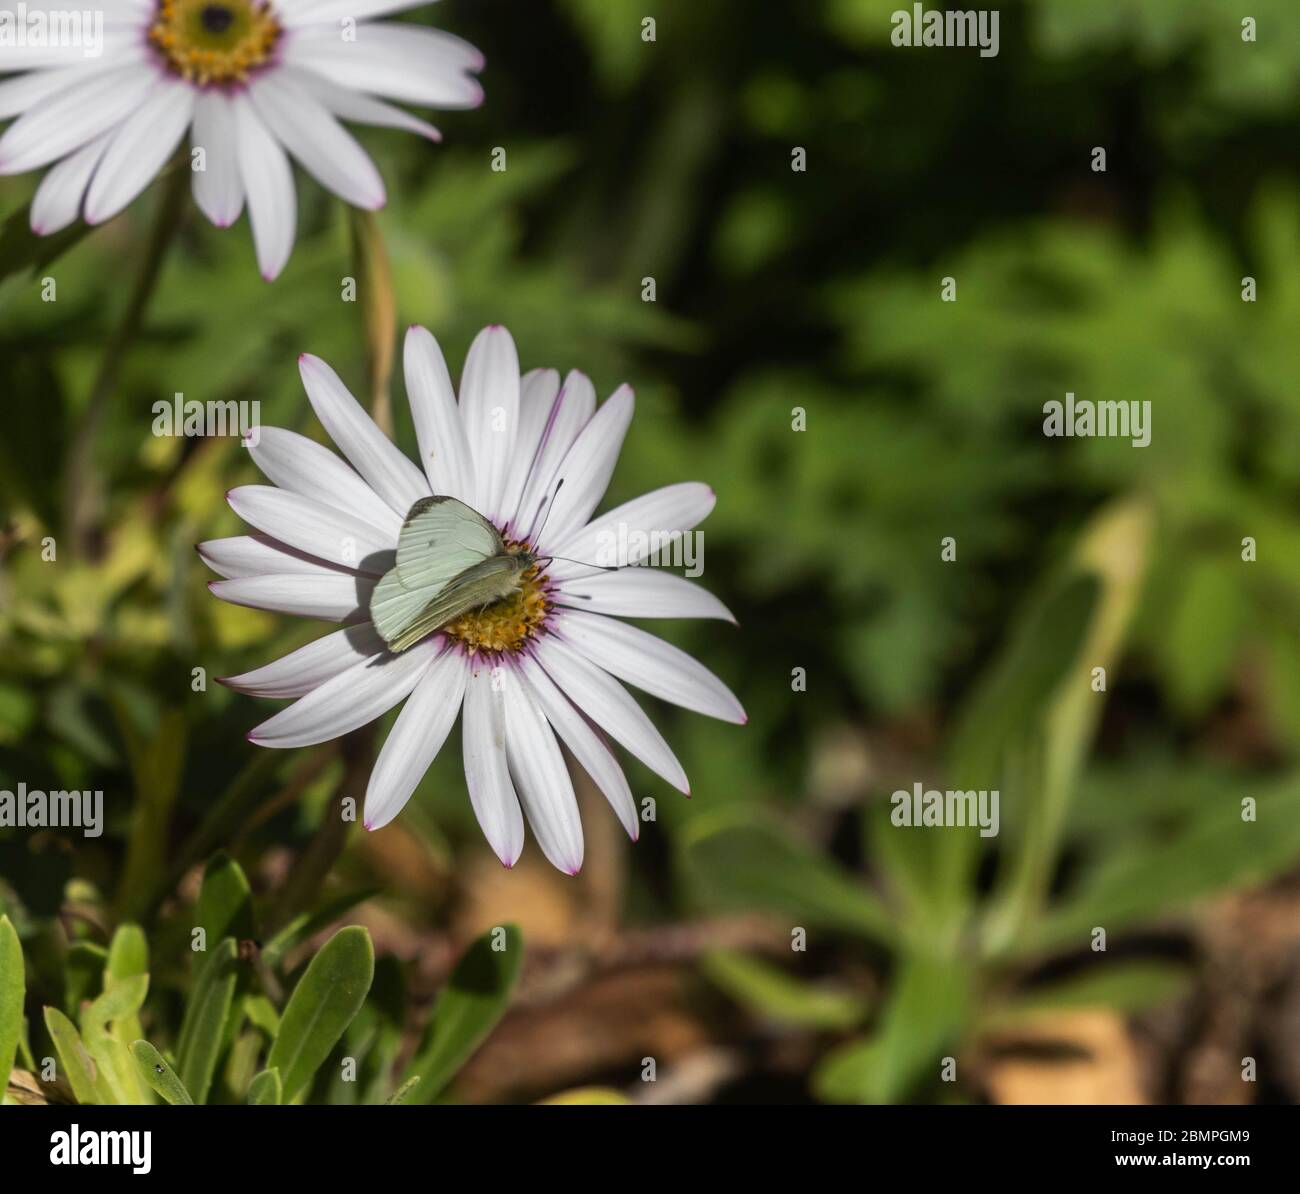 A Small White butterfly (UK) feeding on the nectar from an osteospermum flower. Stock Photo